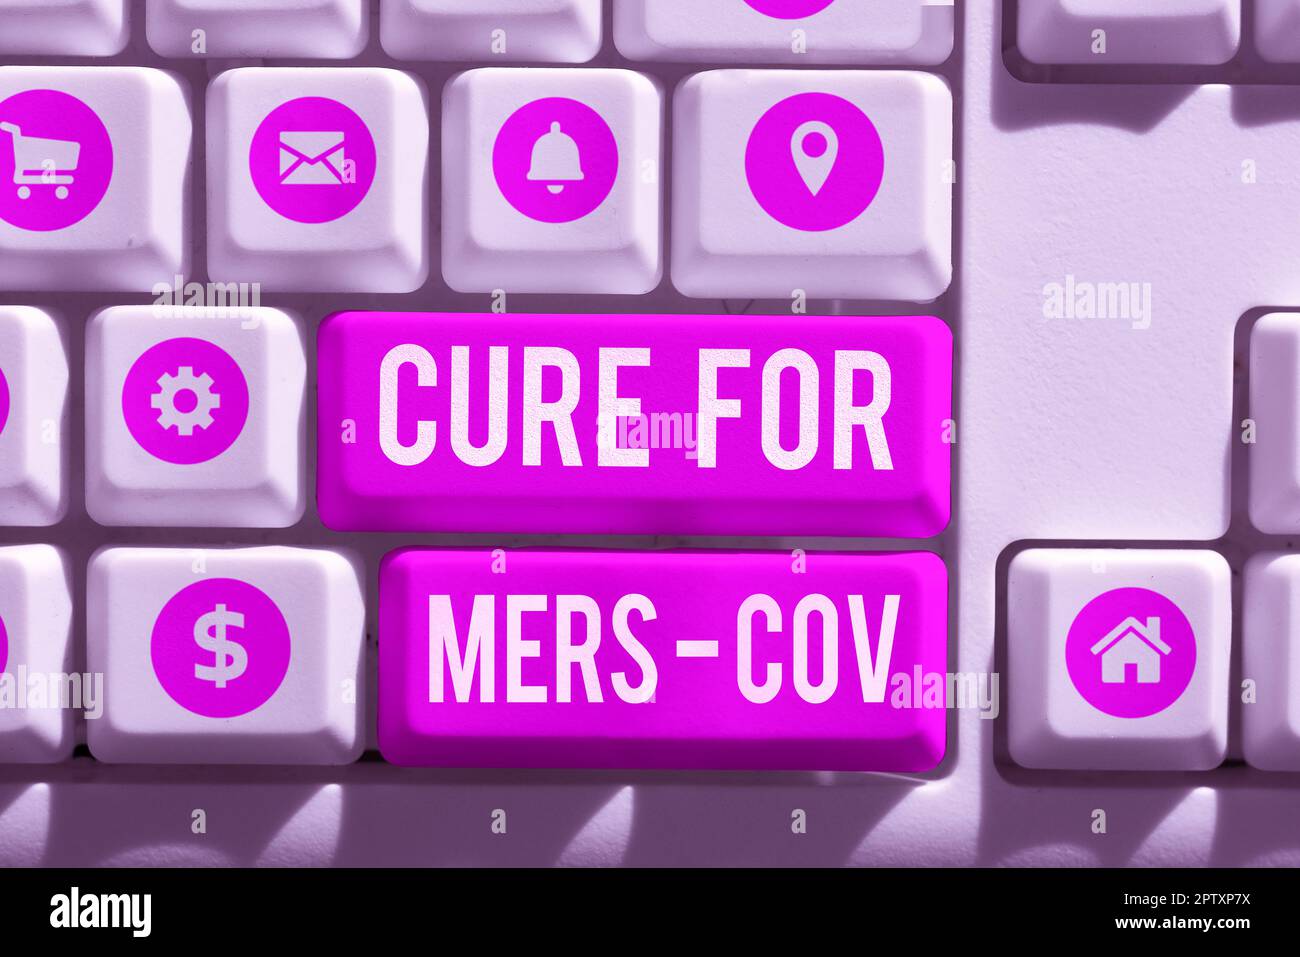 Sign displaying Cure For Mers Cov, Business idea individuals receive medical attention to relieve illness Stock Photo